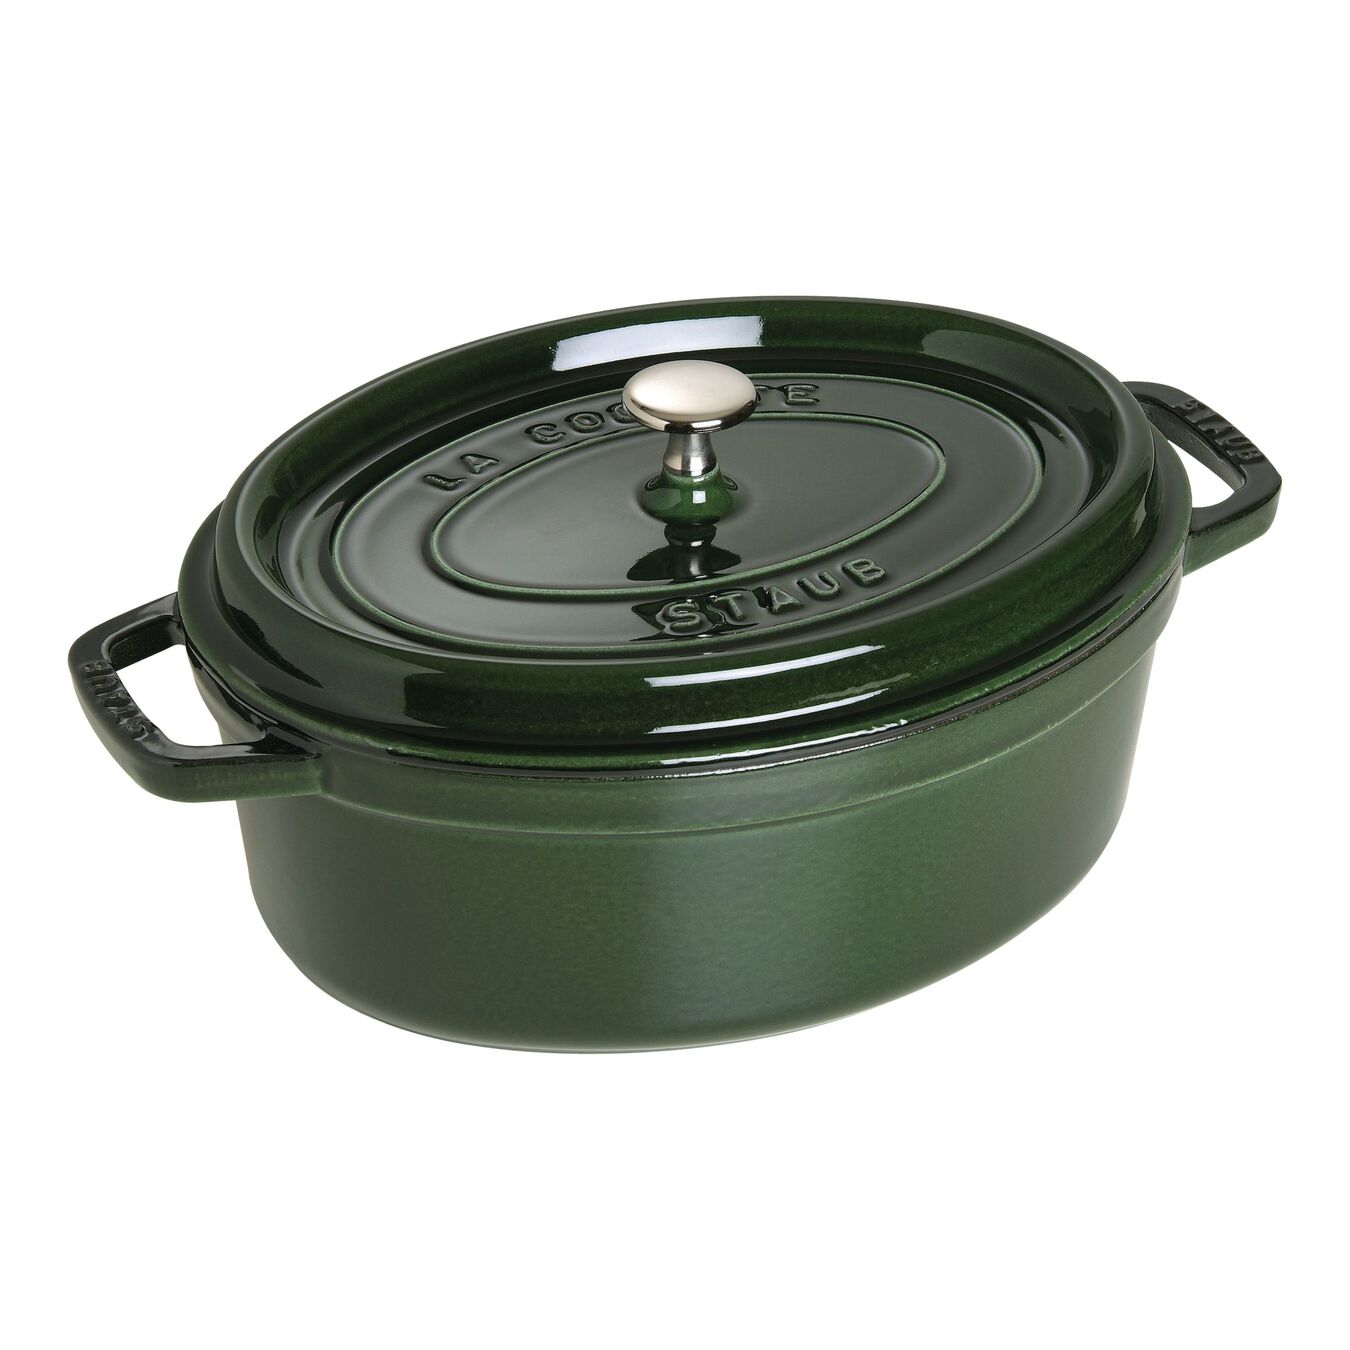 29 cm oval Cast iron Cocotte basil-green,,large 1